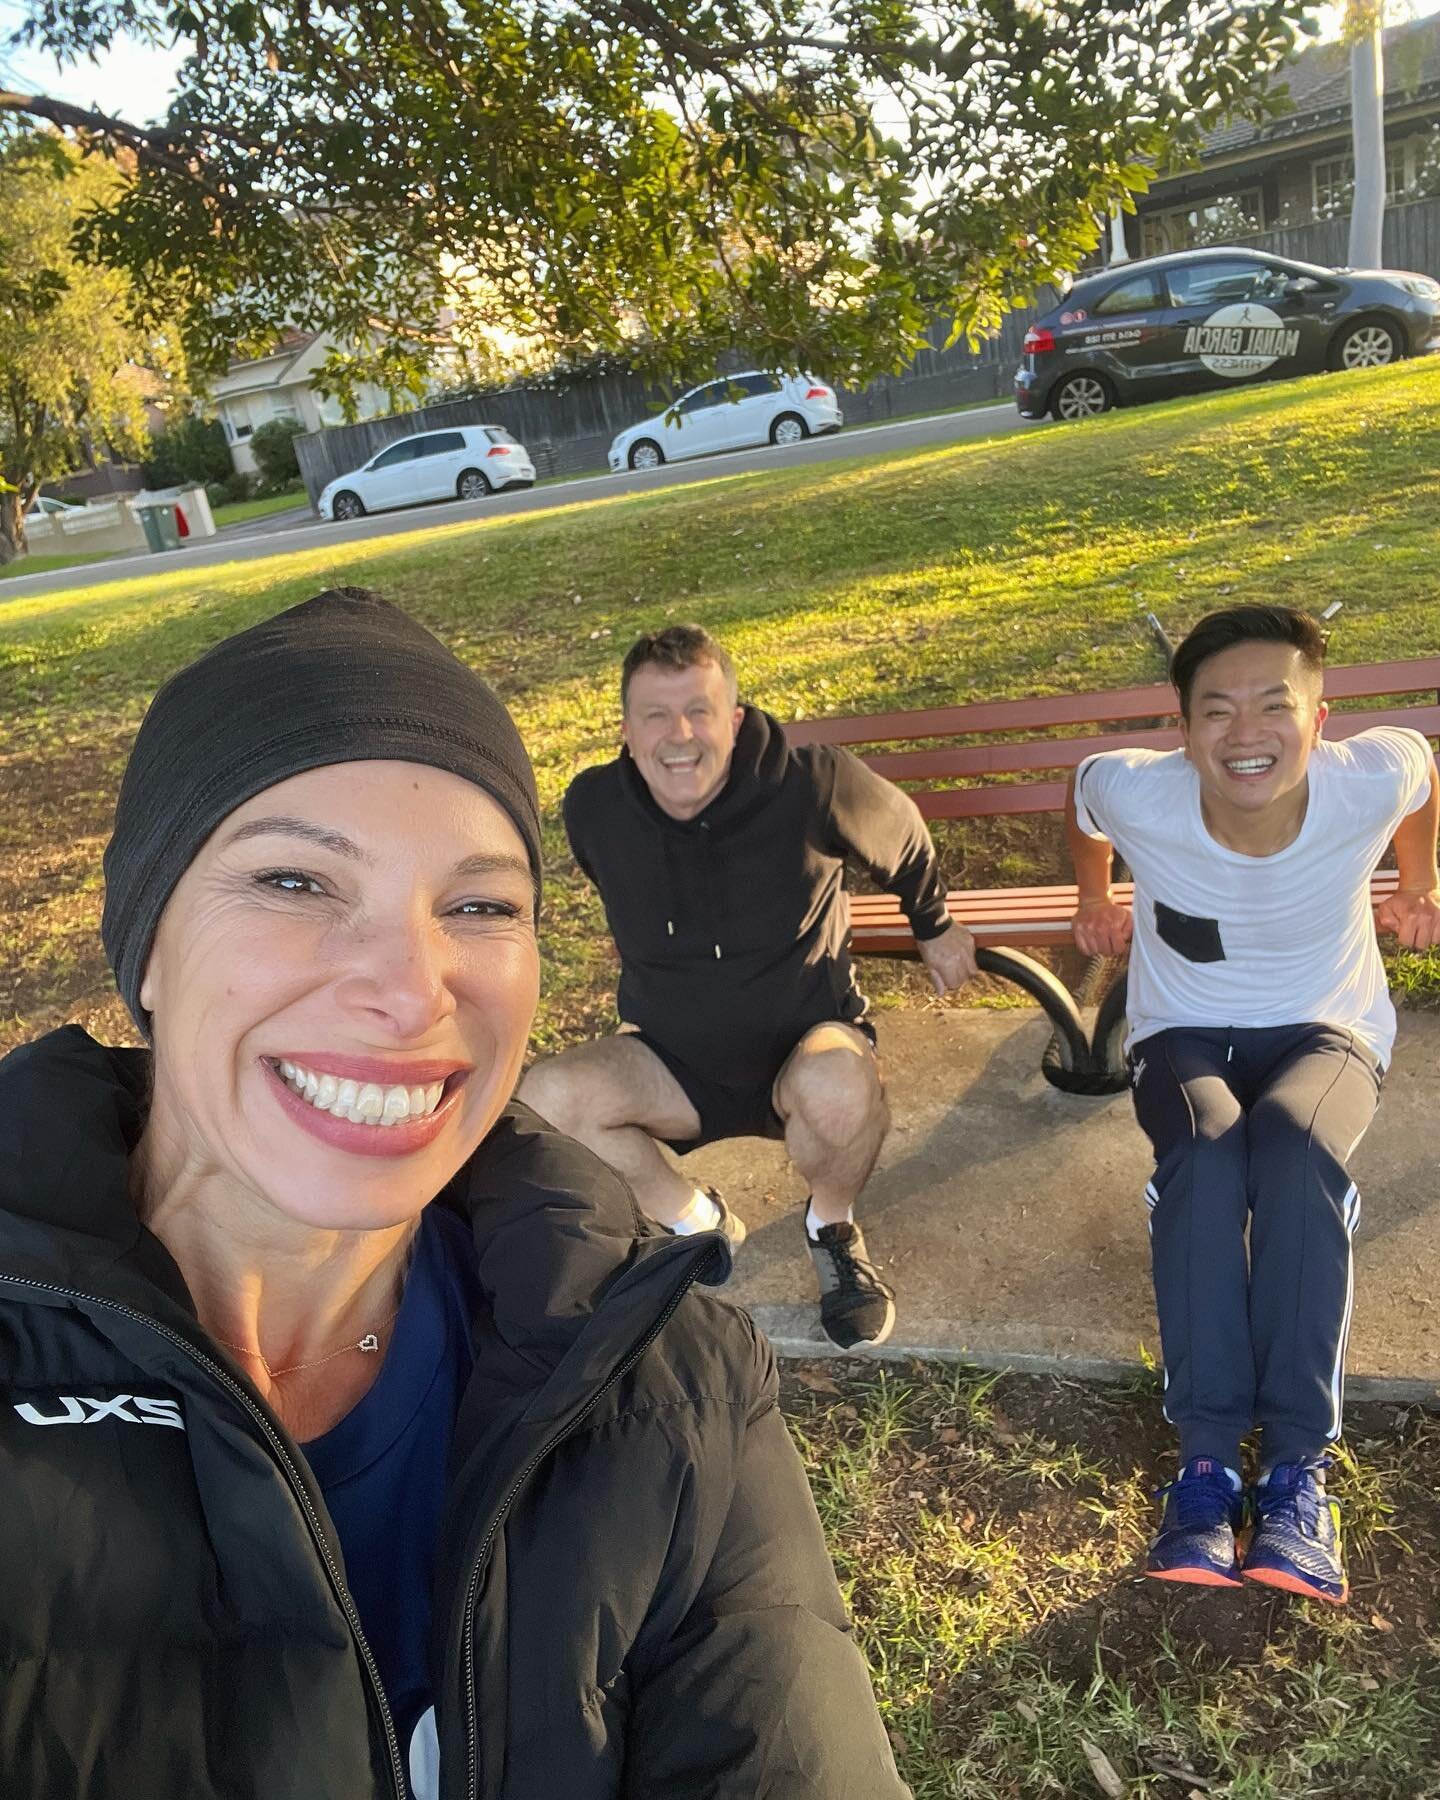 A great surprise to have @pango_mancake join the fun today. Love these boys to bits 💗💗

#manalgarciafitness #outdoorfitness #fitness #innerwestmums #kettlebells #skipping #boxing#run#triathlon#running#athletics#runner#trailrun#runners#trailrunning#